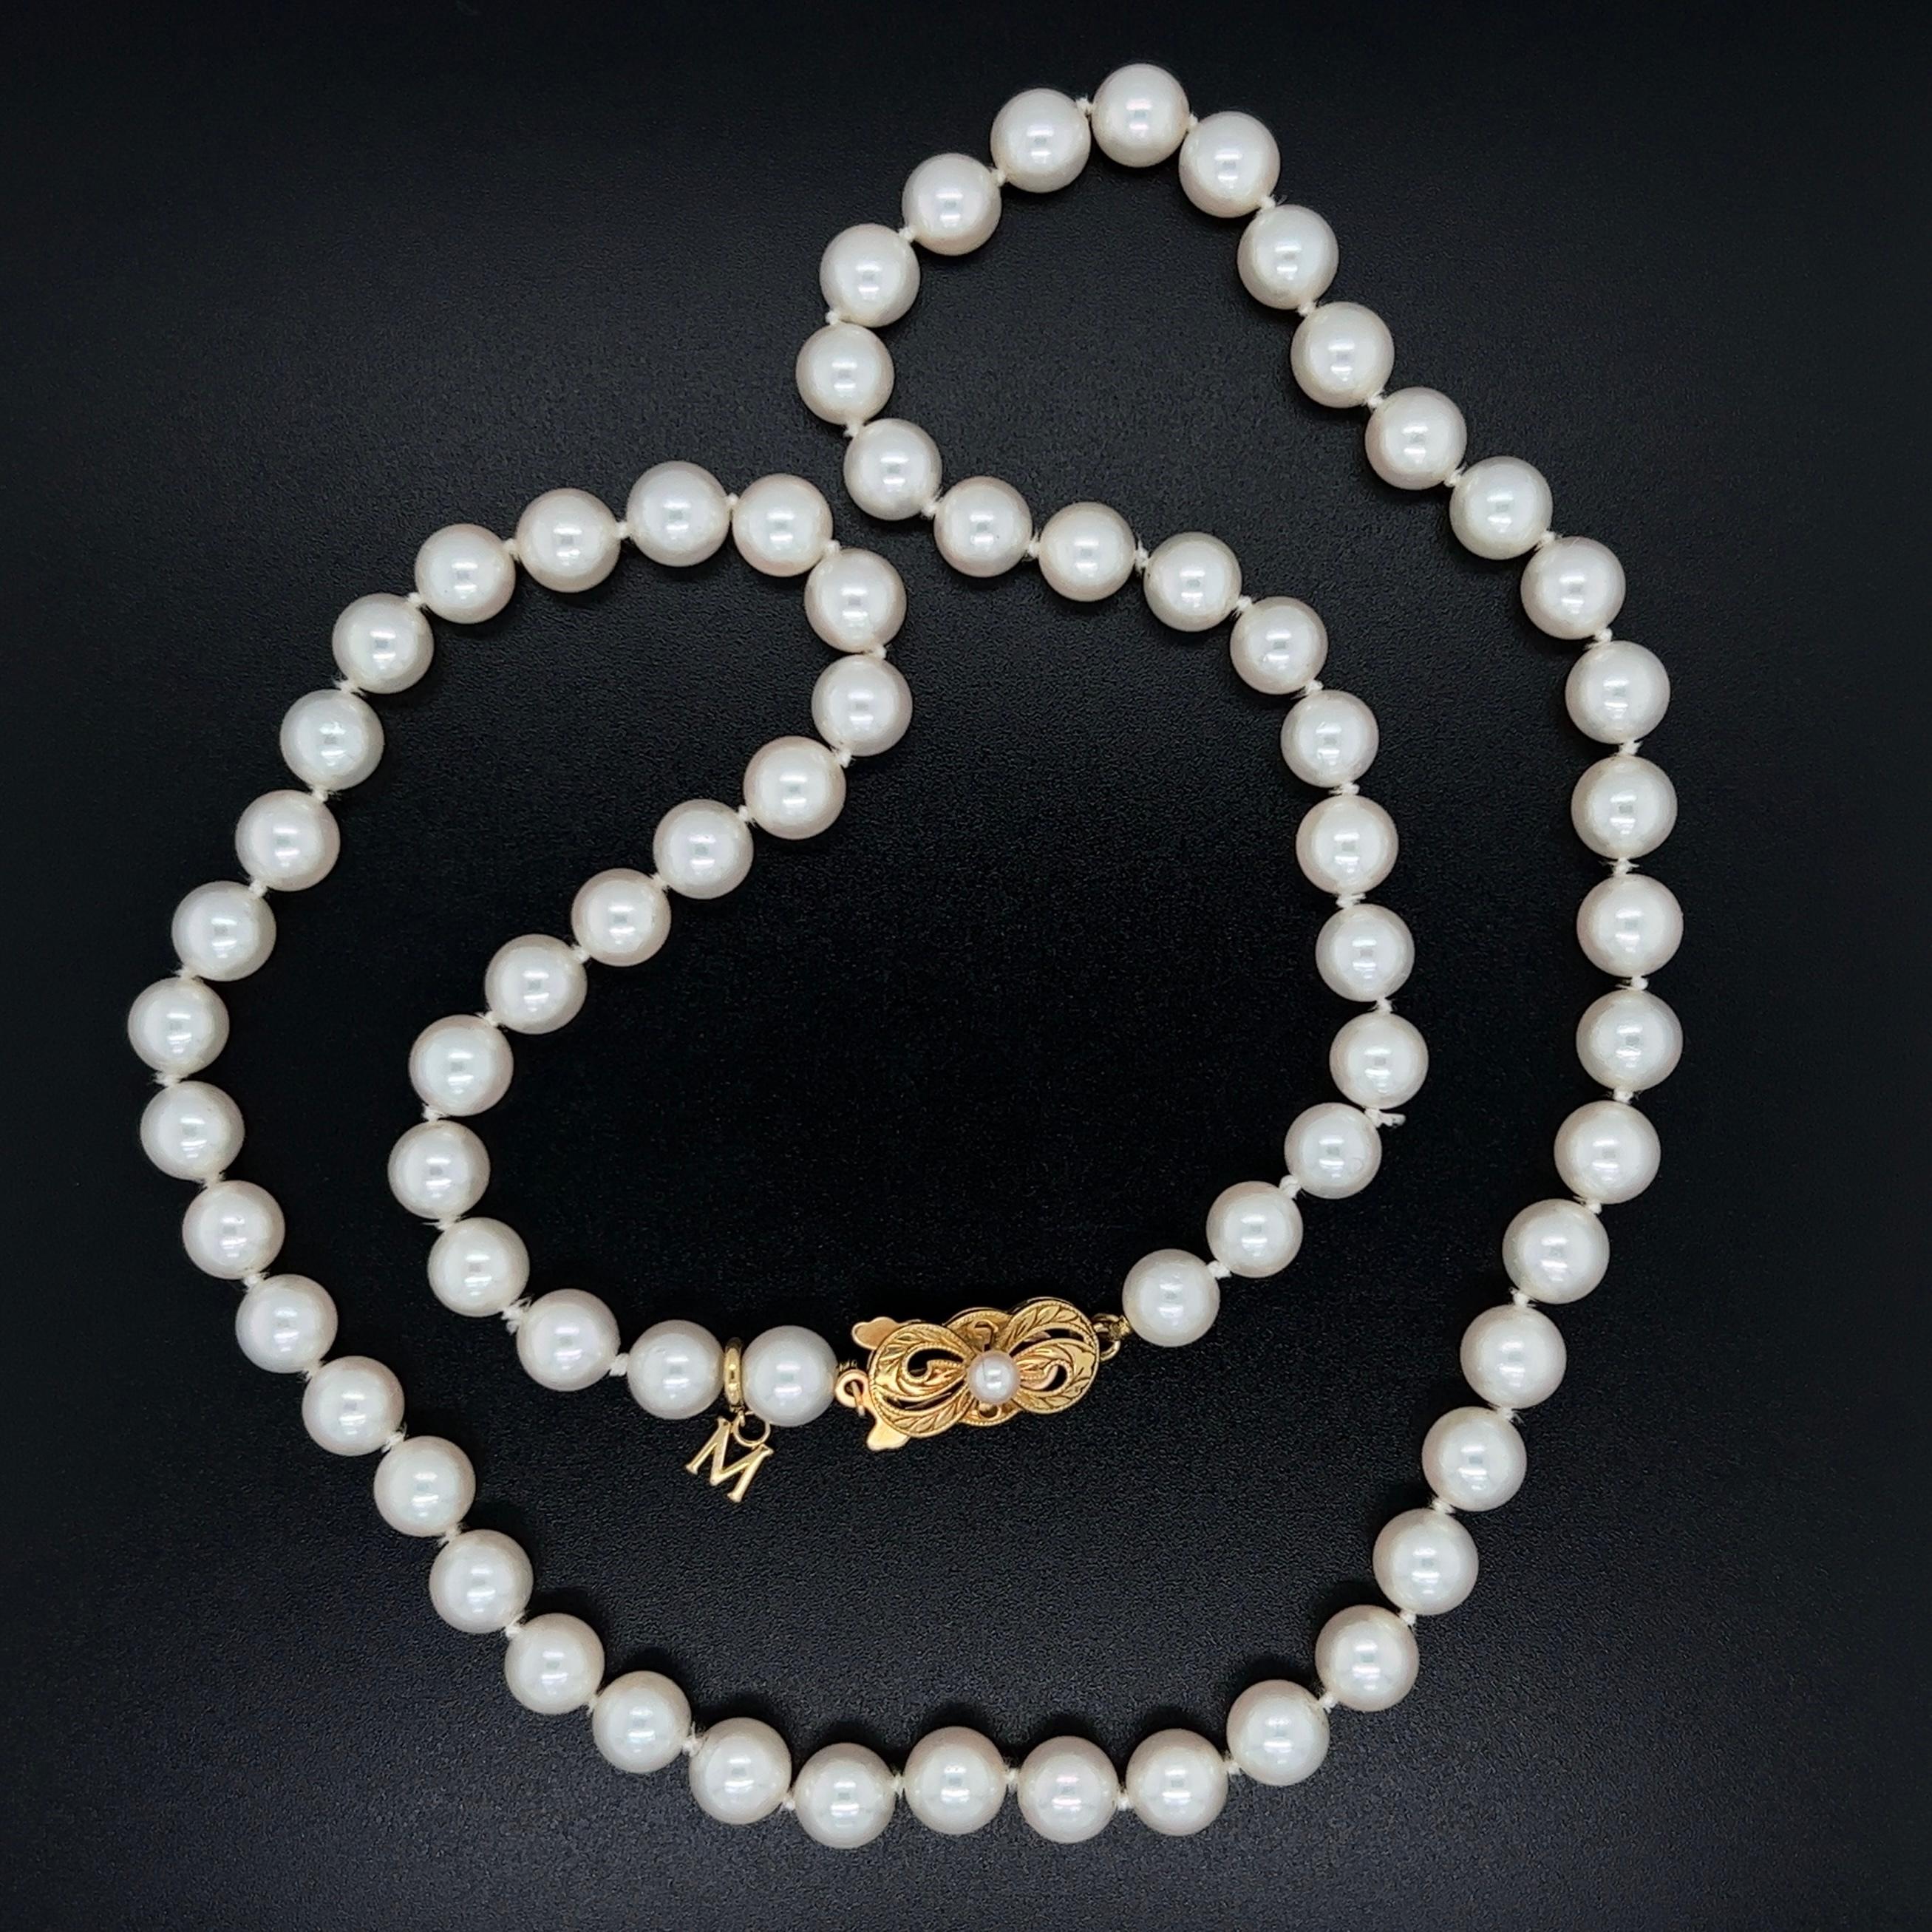 Simply Beautiful! Fine MIKIMOTO Akoya 6.8mm Cultured Pearl Strand Necklace held by a 18K yellow Gold clasp stamped with the famous Mikimoto 